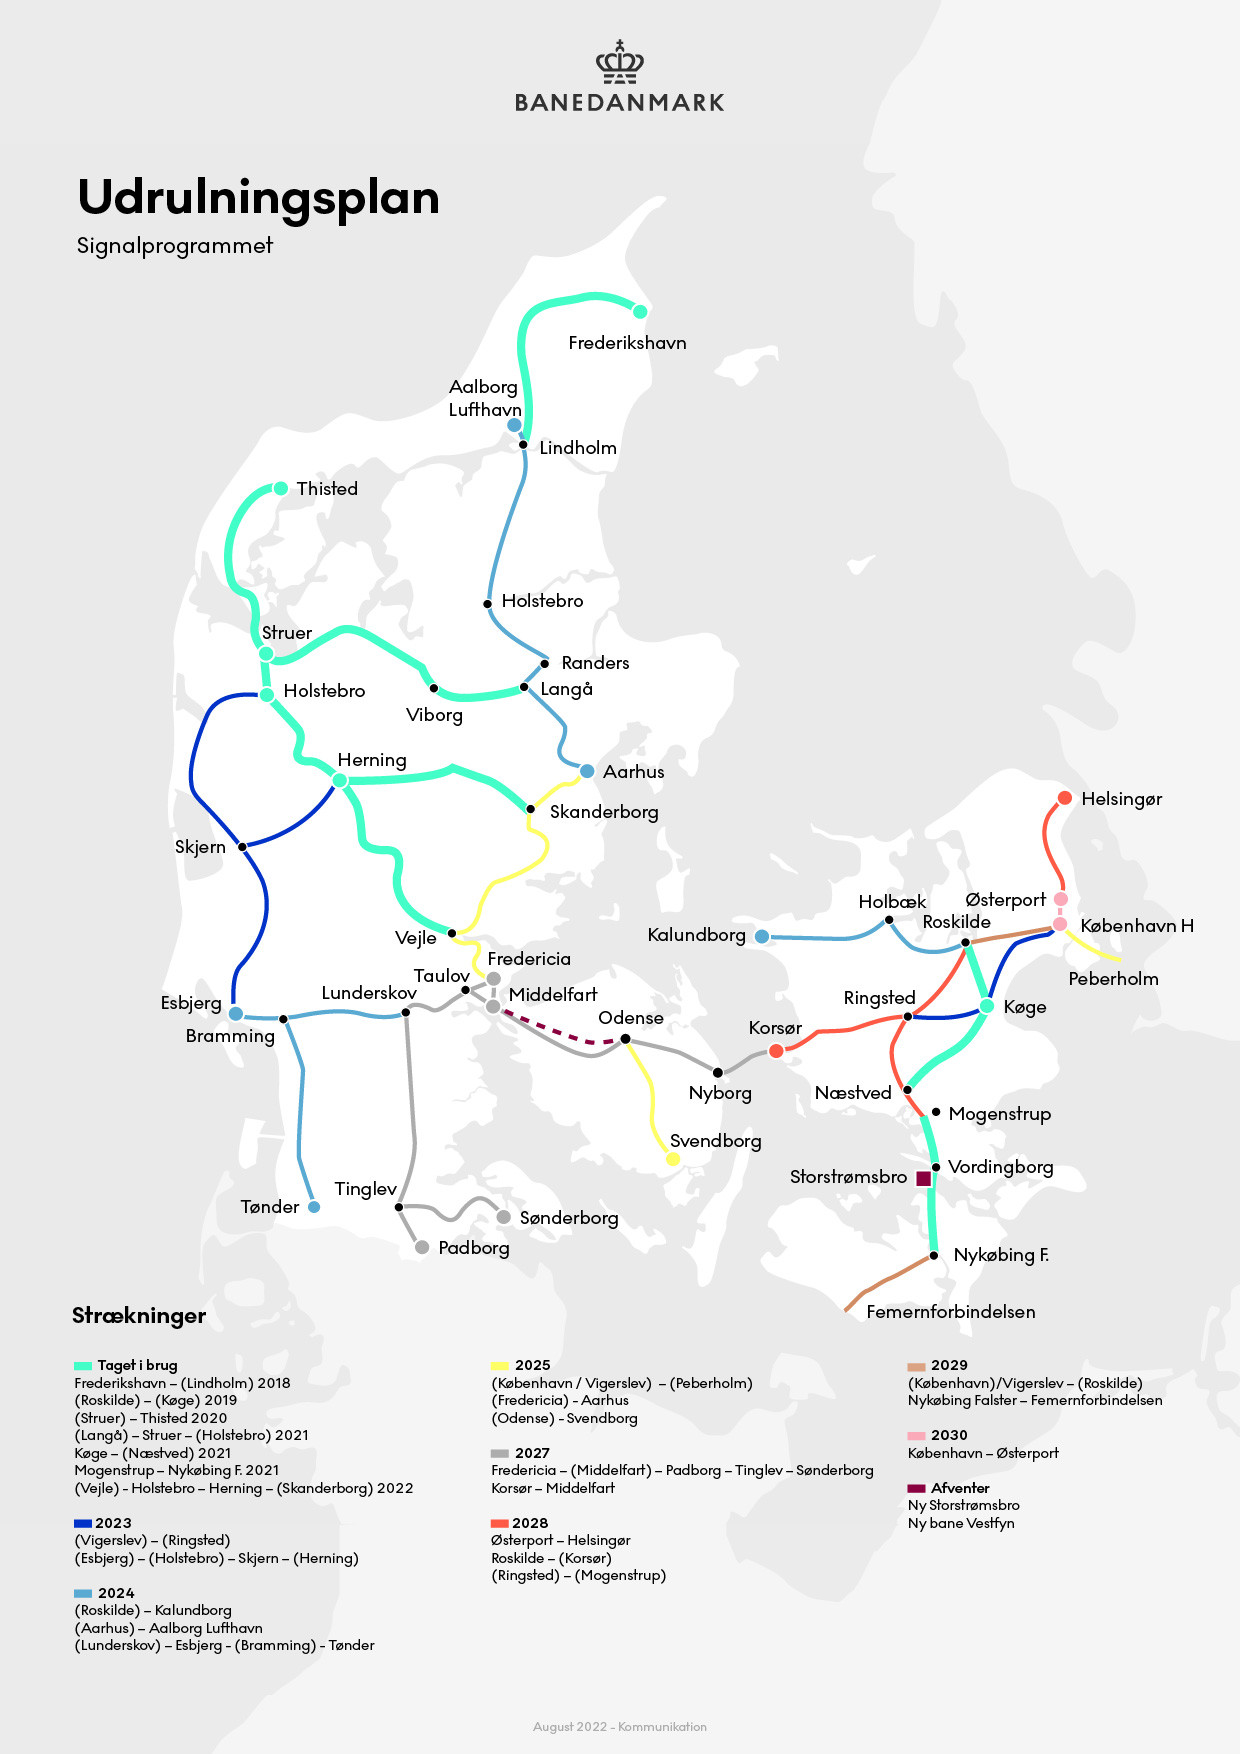 A map of the part of Denmark highlighting the 15 year resignalling project